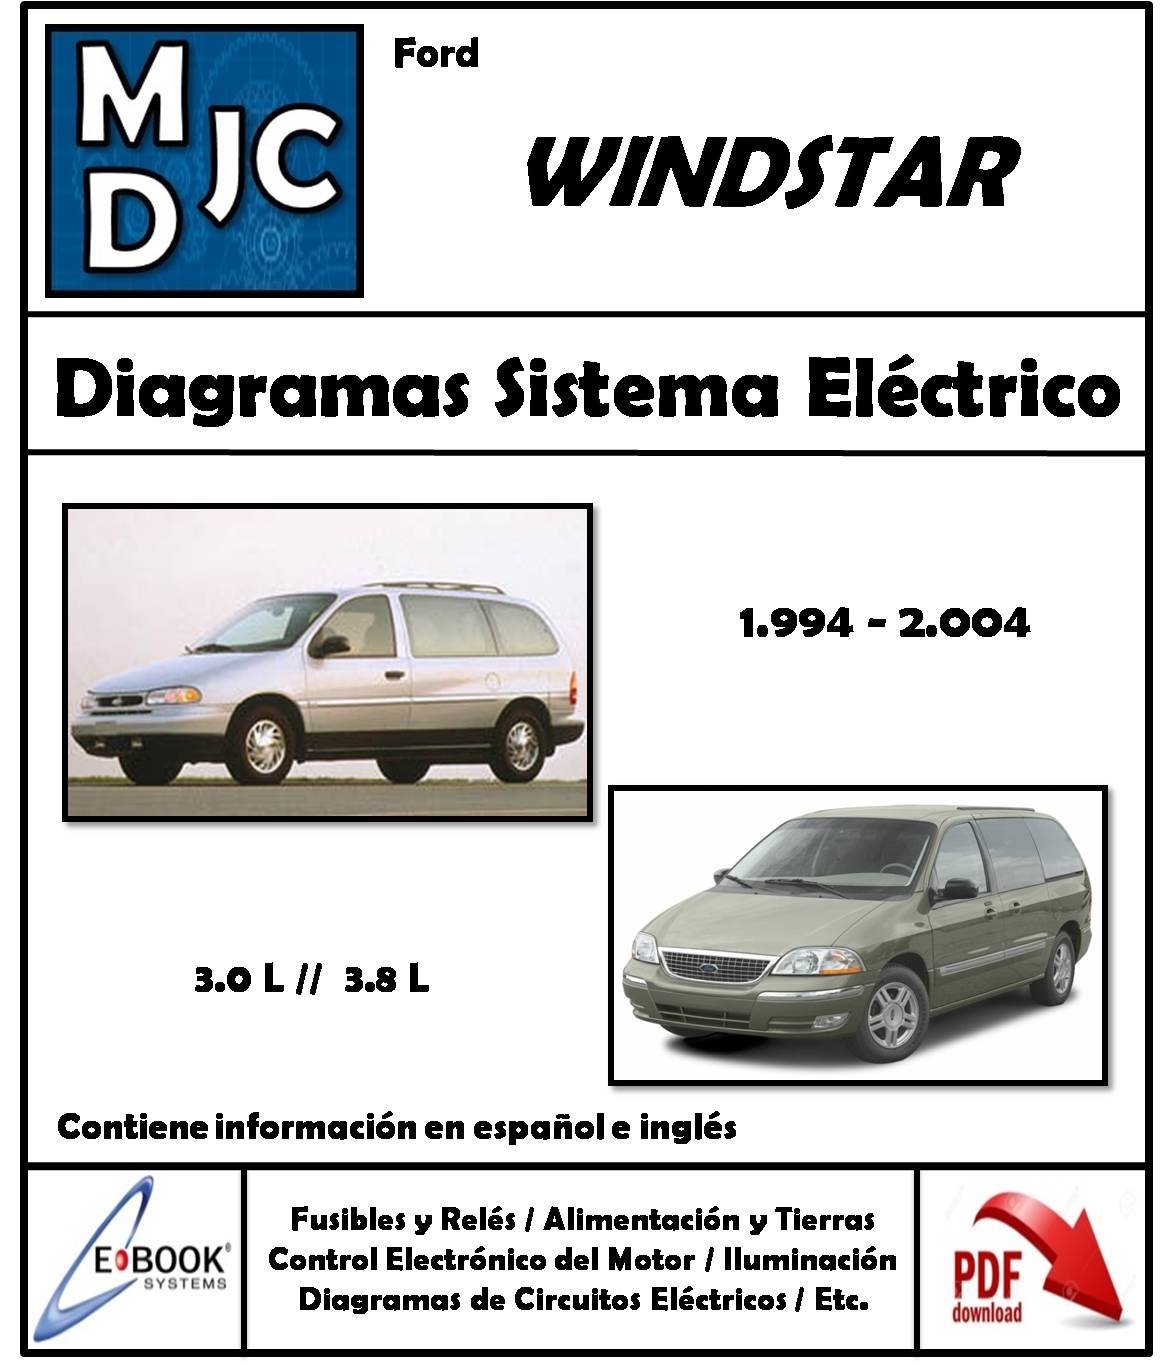 Ford WindStar 1994 - 2004